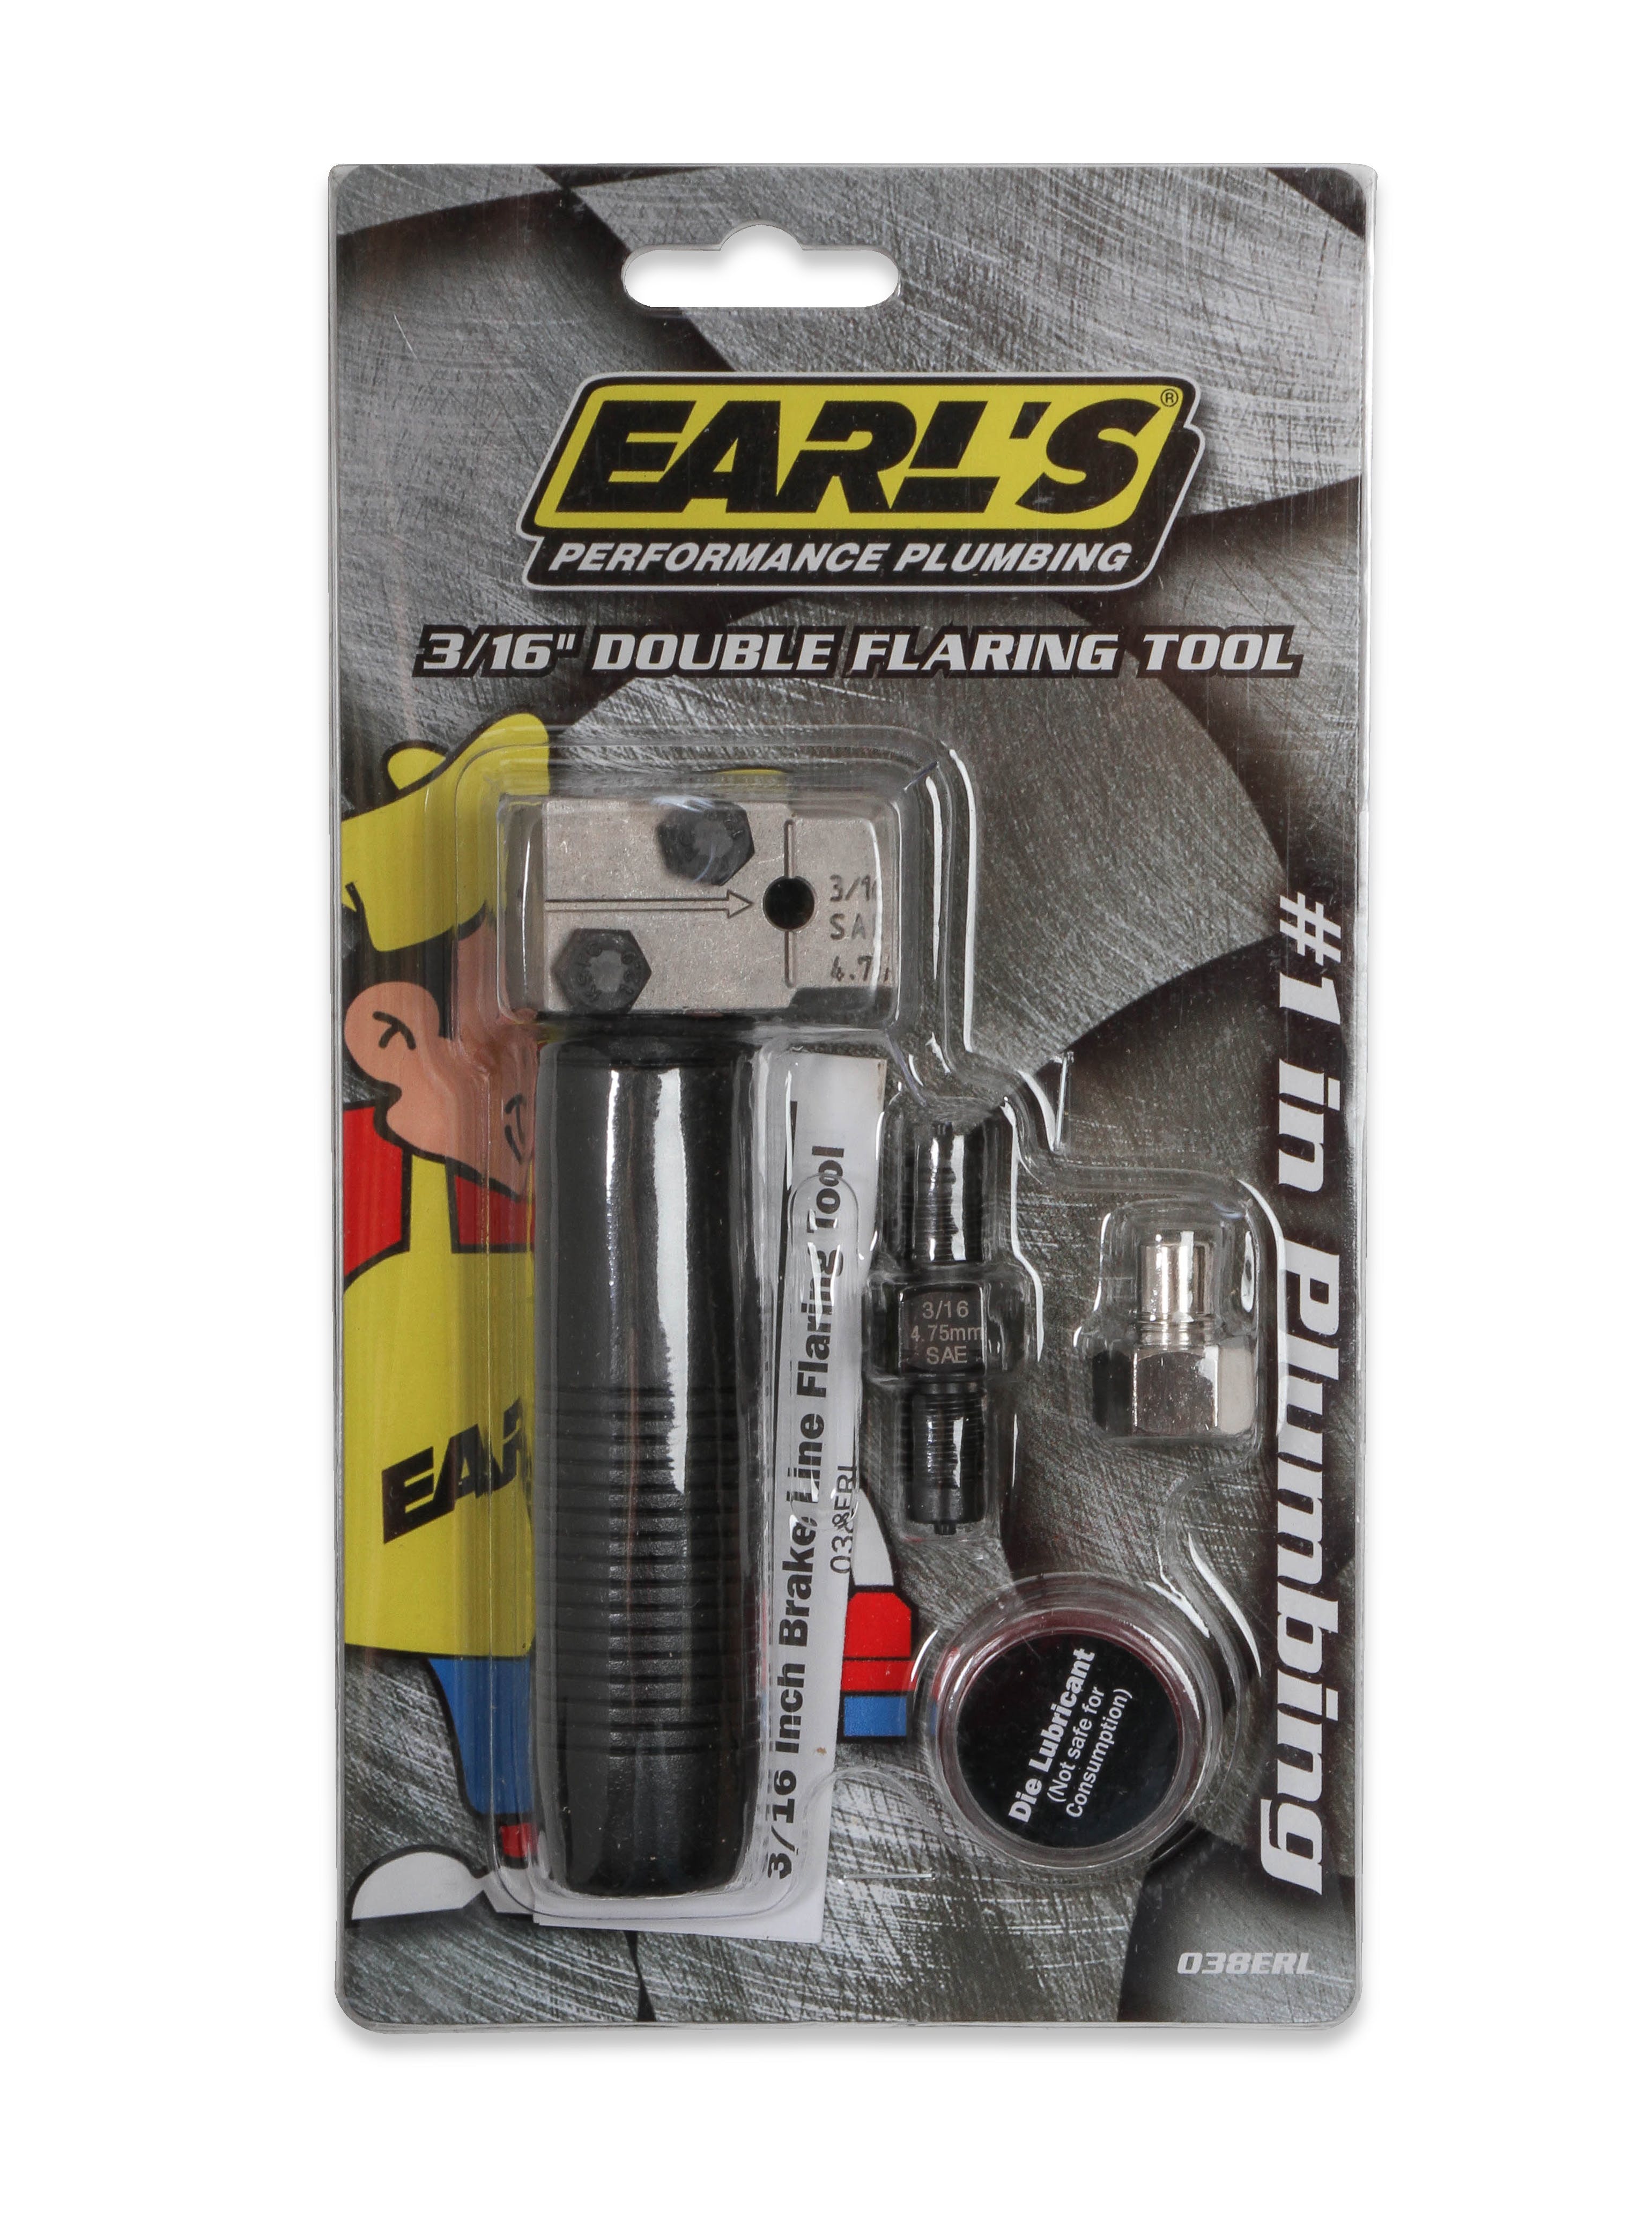 Earl's Performance Plumbing 038ERL 3/16 IN. DOUBLE FLARING TOOLS